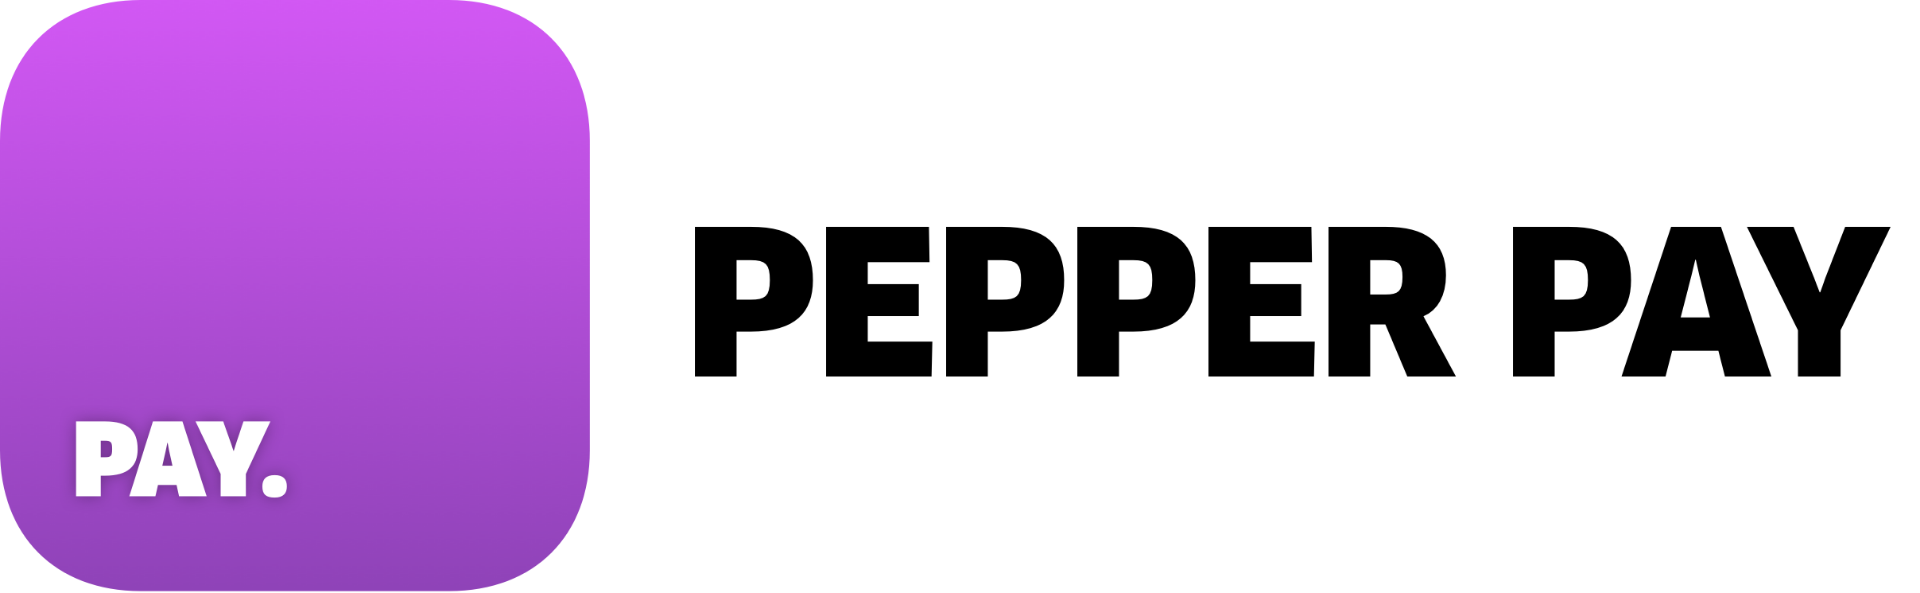 Pepper Pay